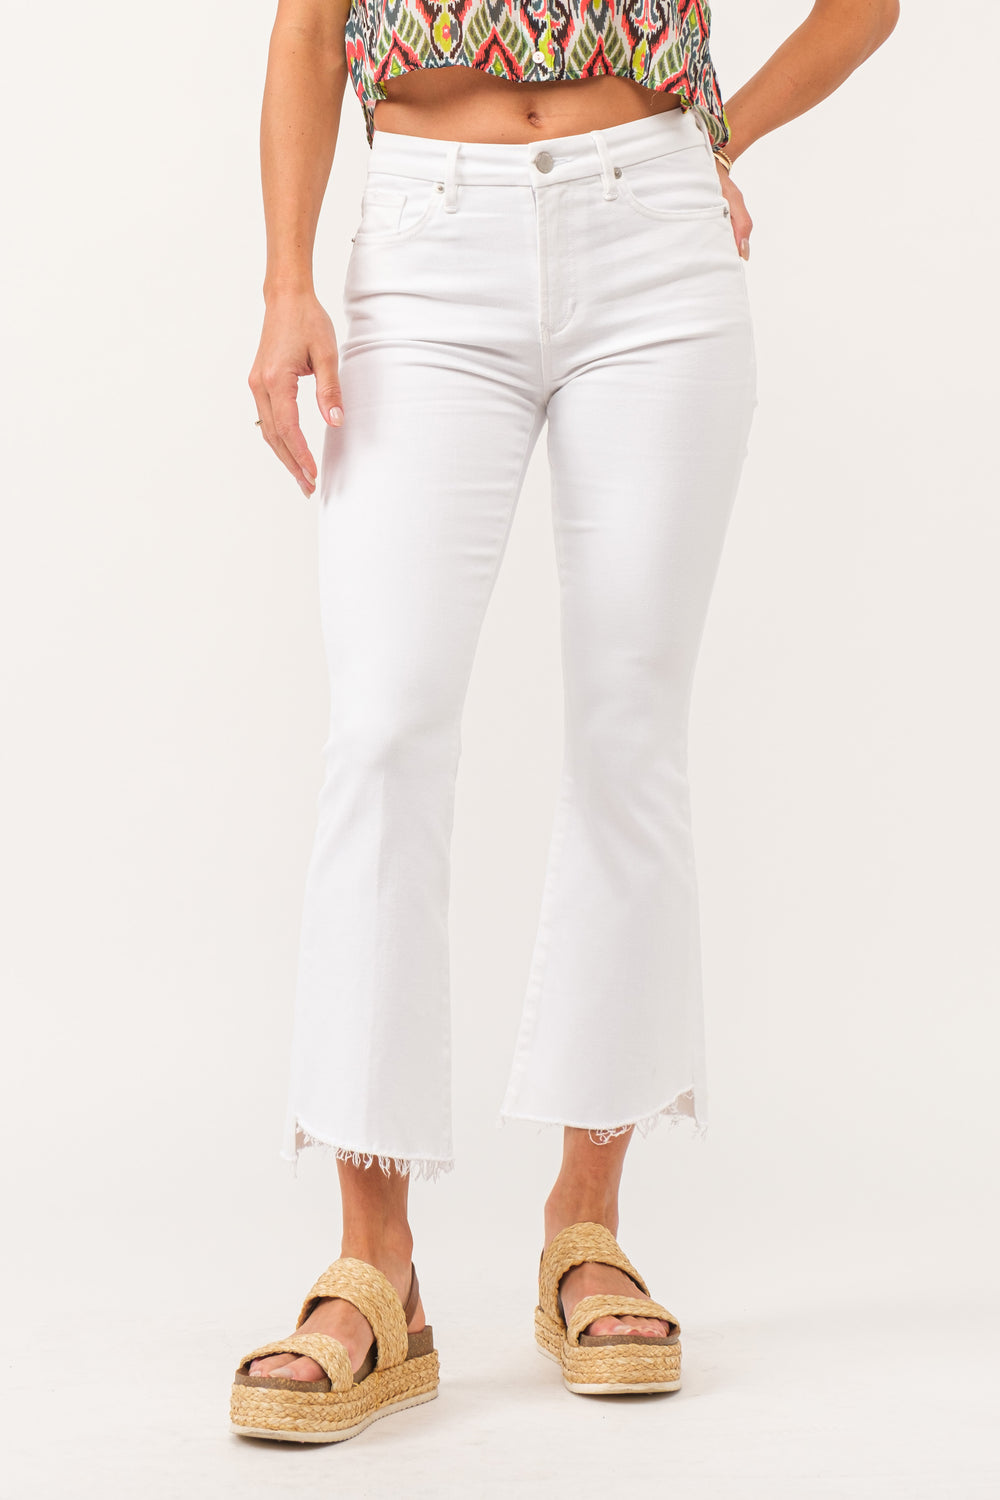 JEANNE JEAN HI-RISE-WHITE WHITE - Kingfisher Road - Online Boutique